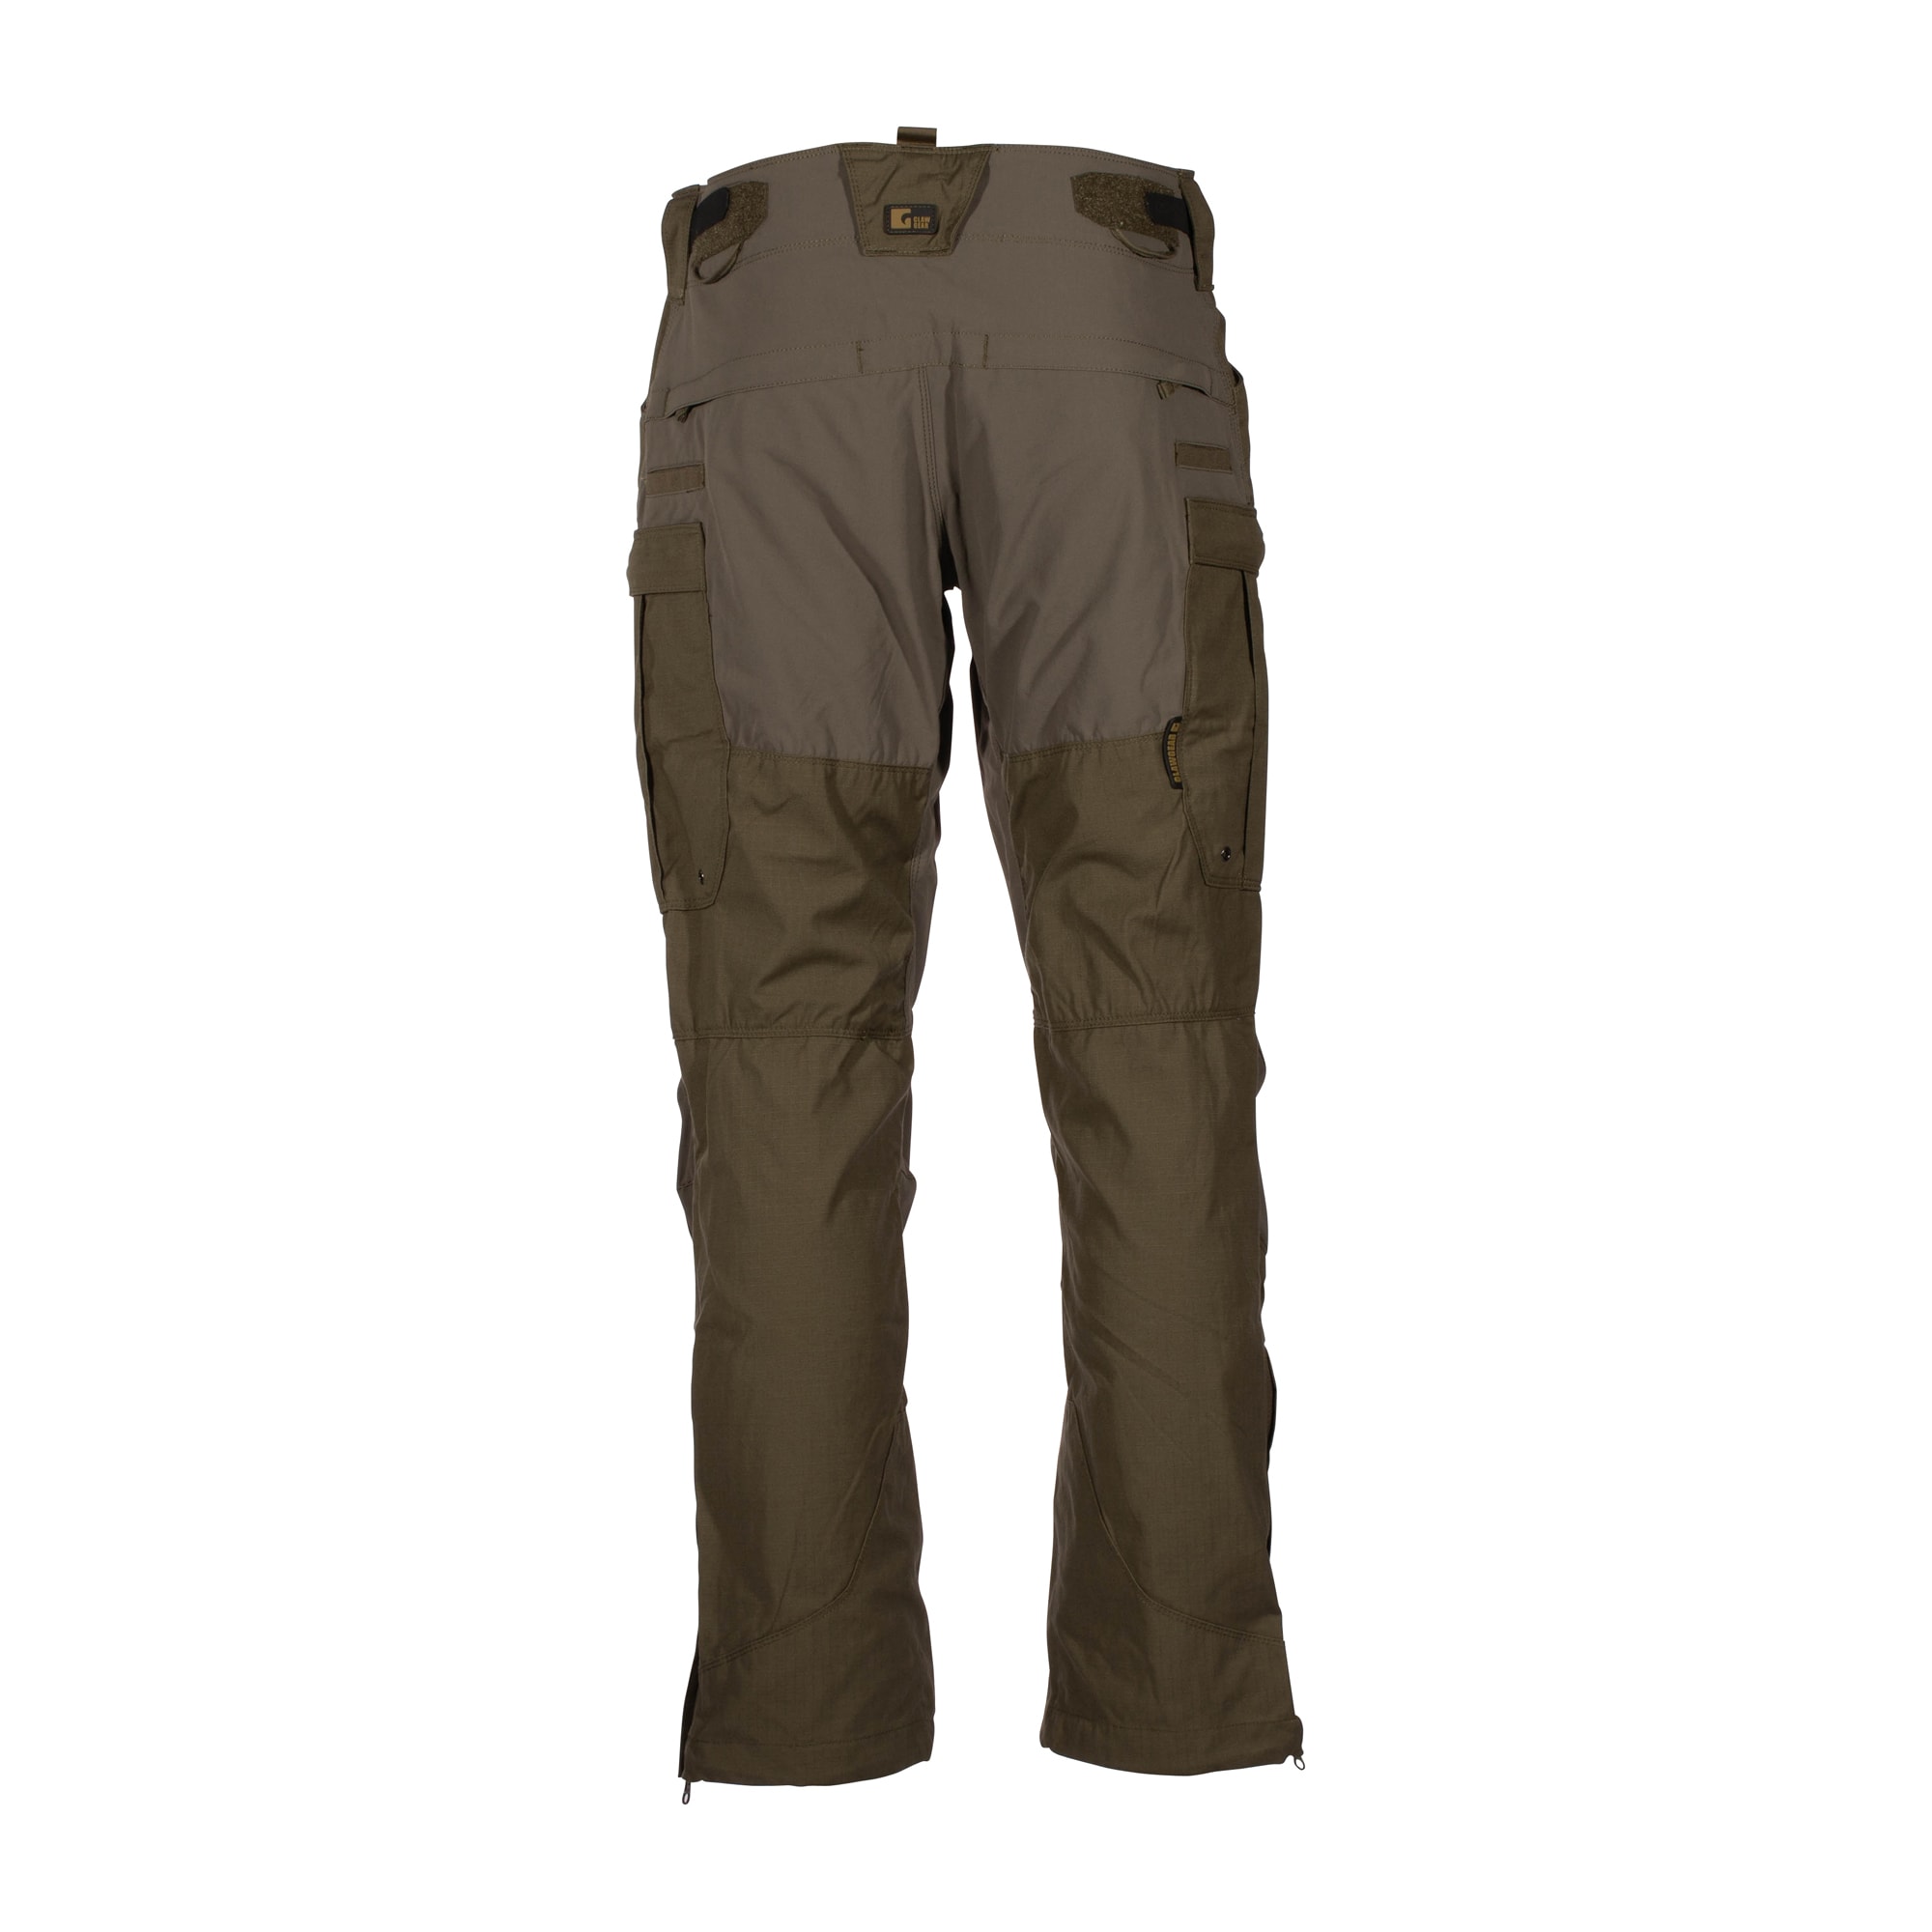 Purchase the ClawGear MK.II Operator Combat Pant ranger green by